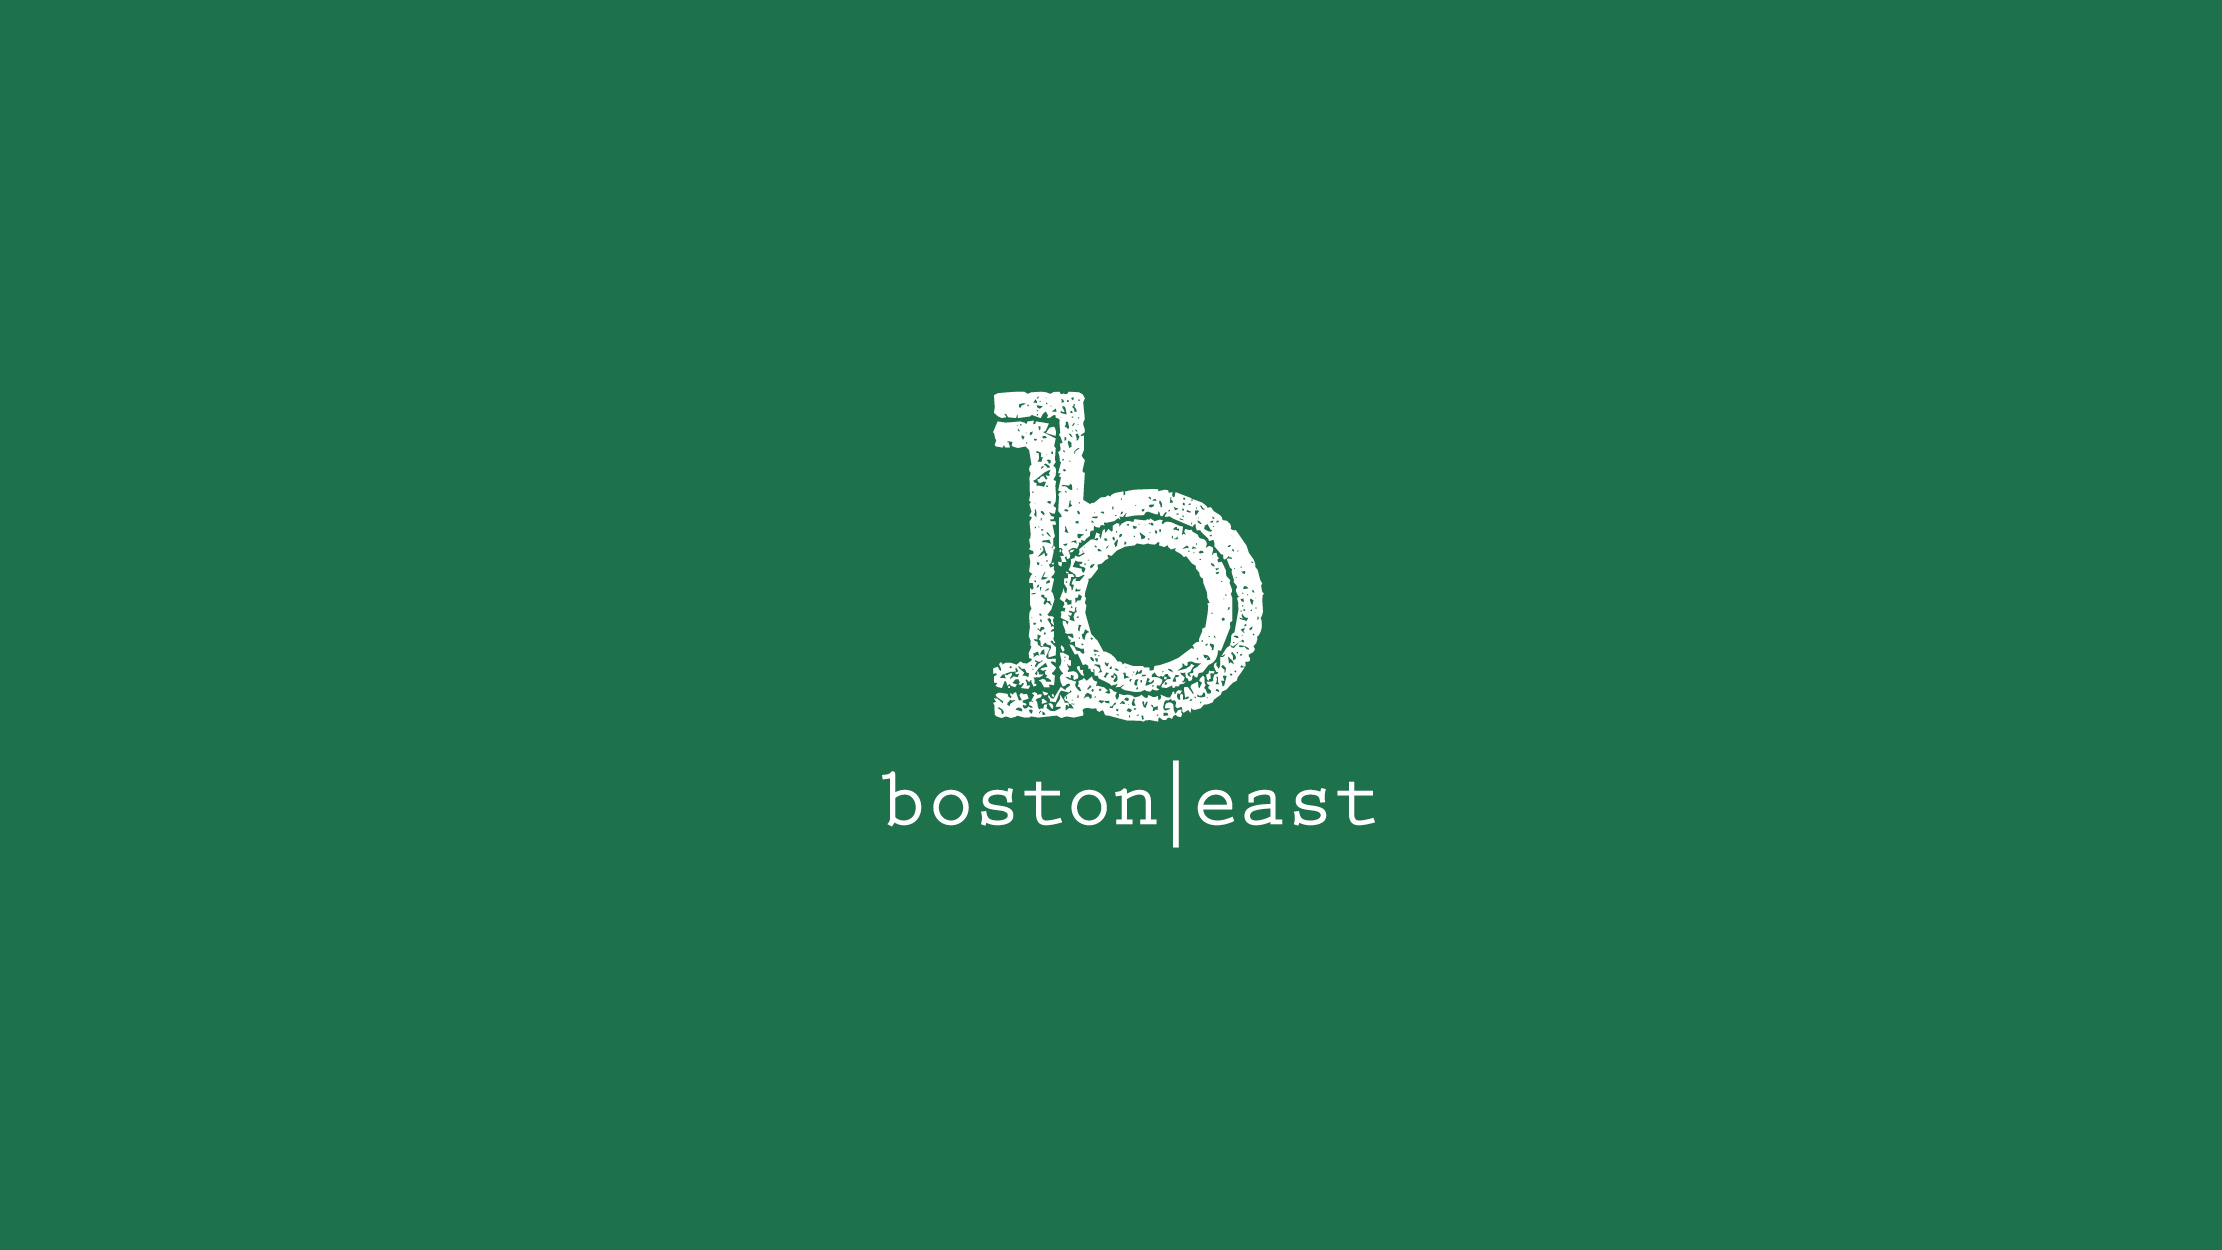 boston east logo on a green background